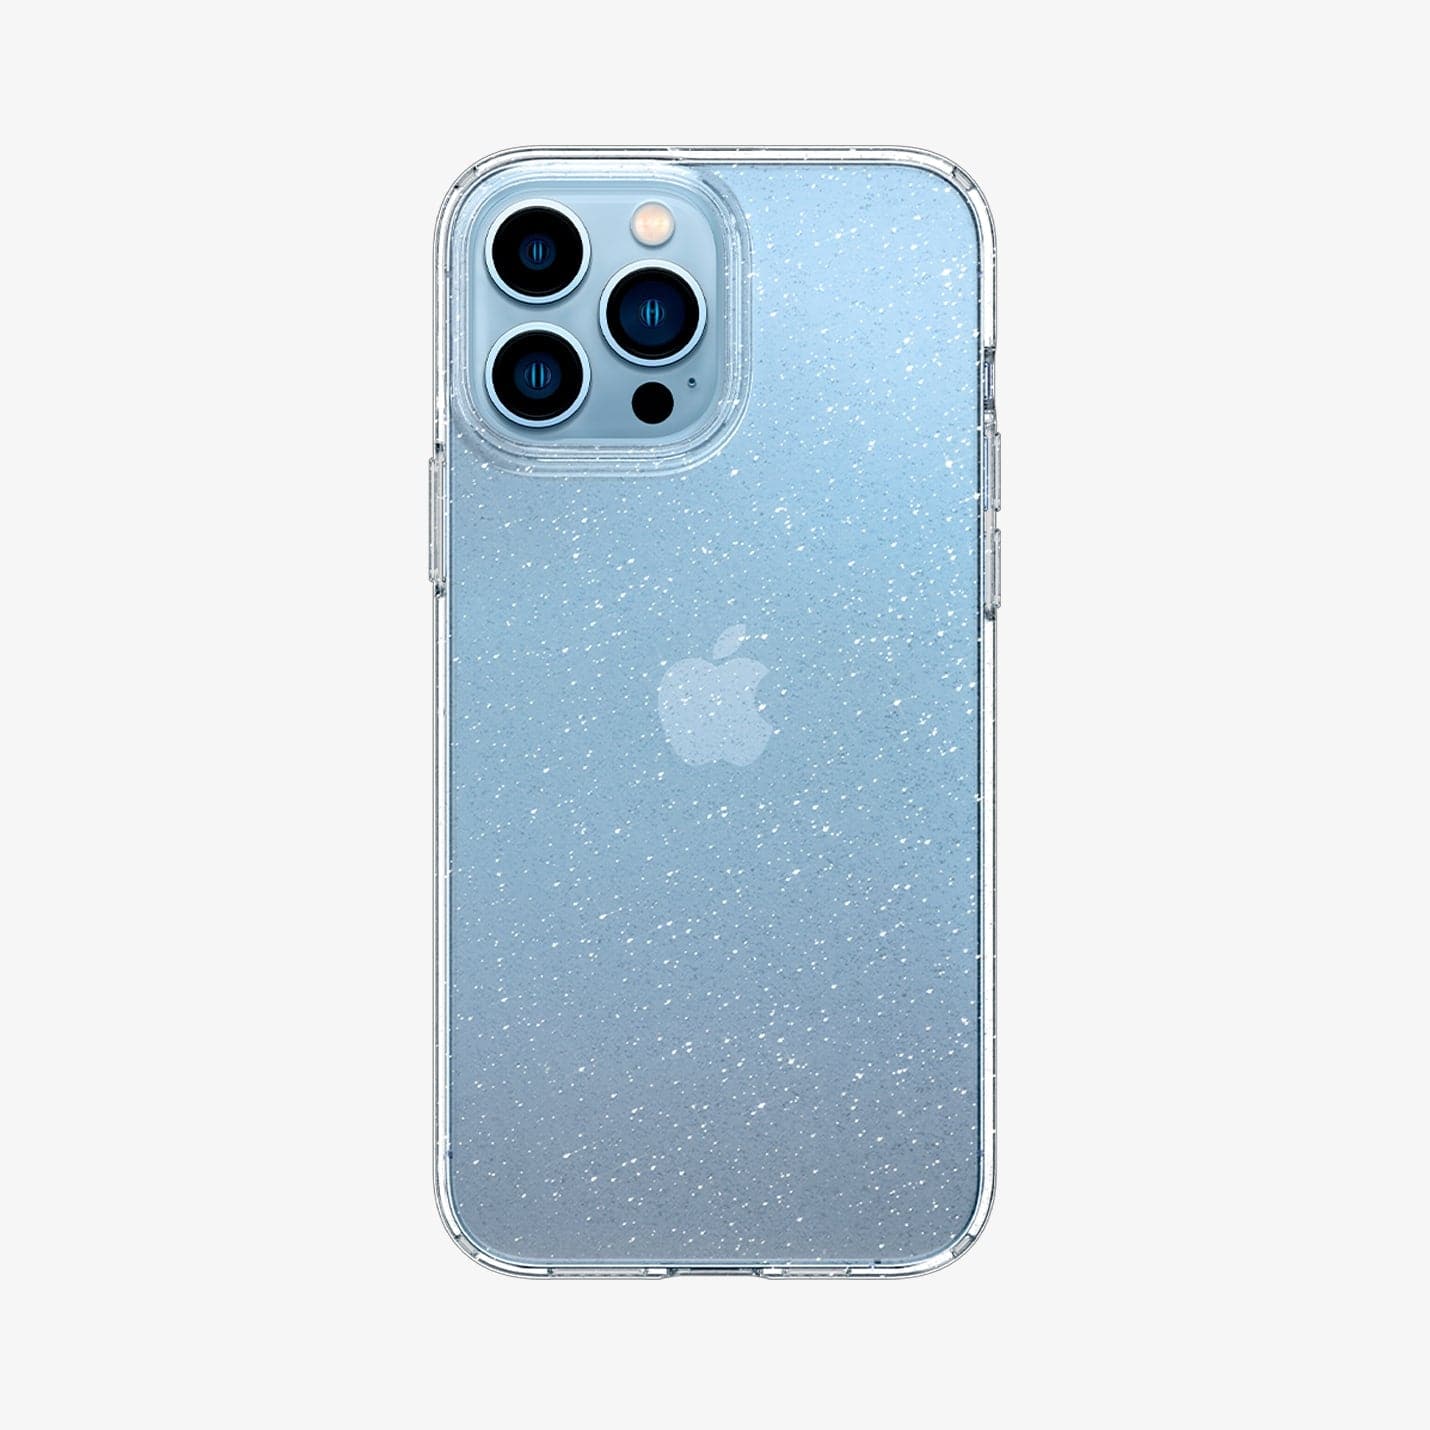 ACS03198 - iPhone 13 Pro Max Case Liquid Crystal Glitter in crystal quartz showing the back